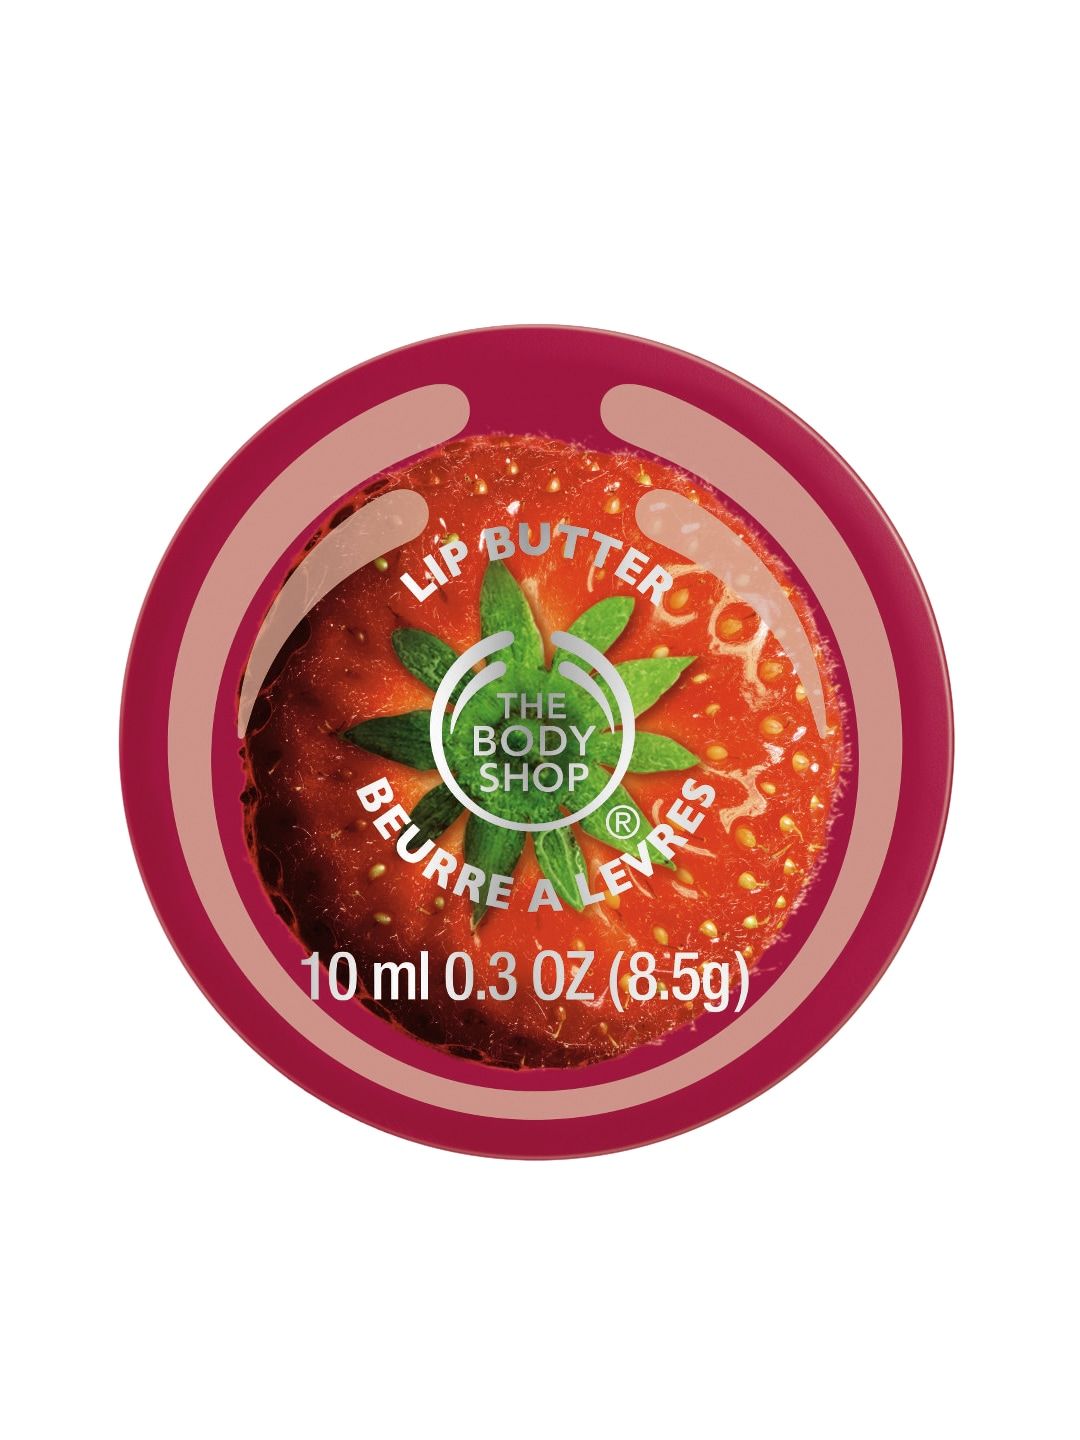 THE BODY SHOP Nude Strawberry Lip Butter 8.5g Price in India